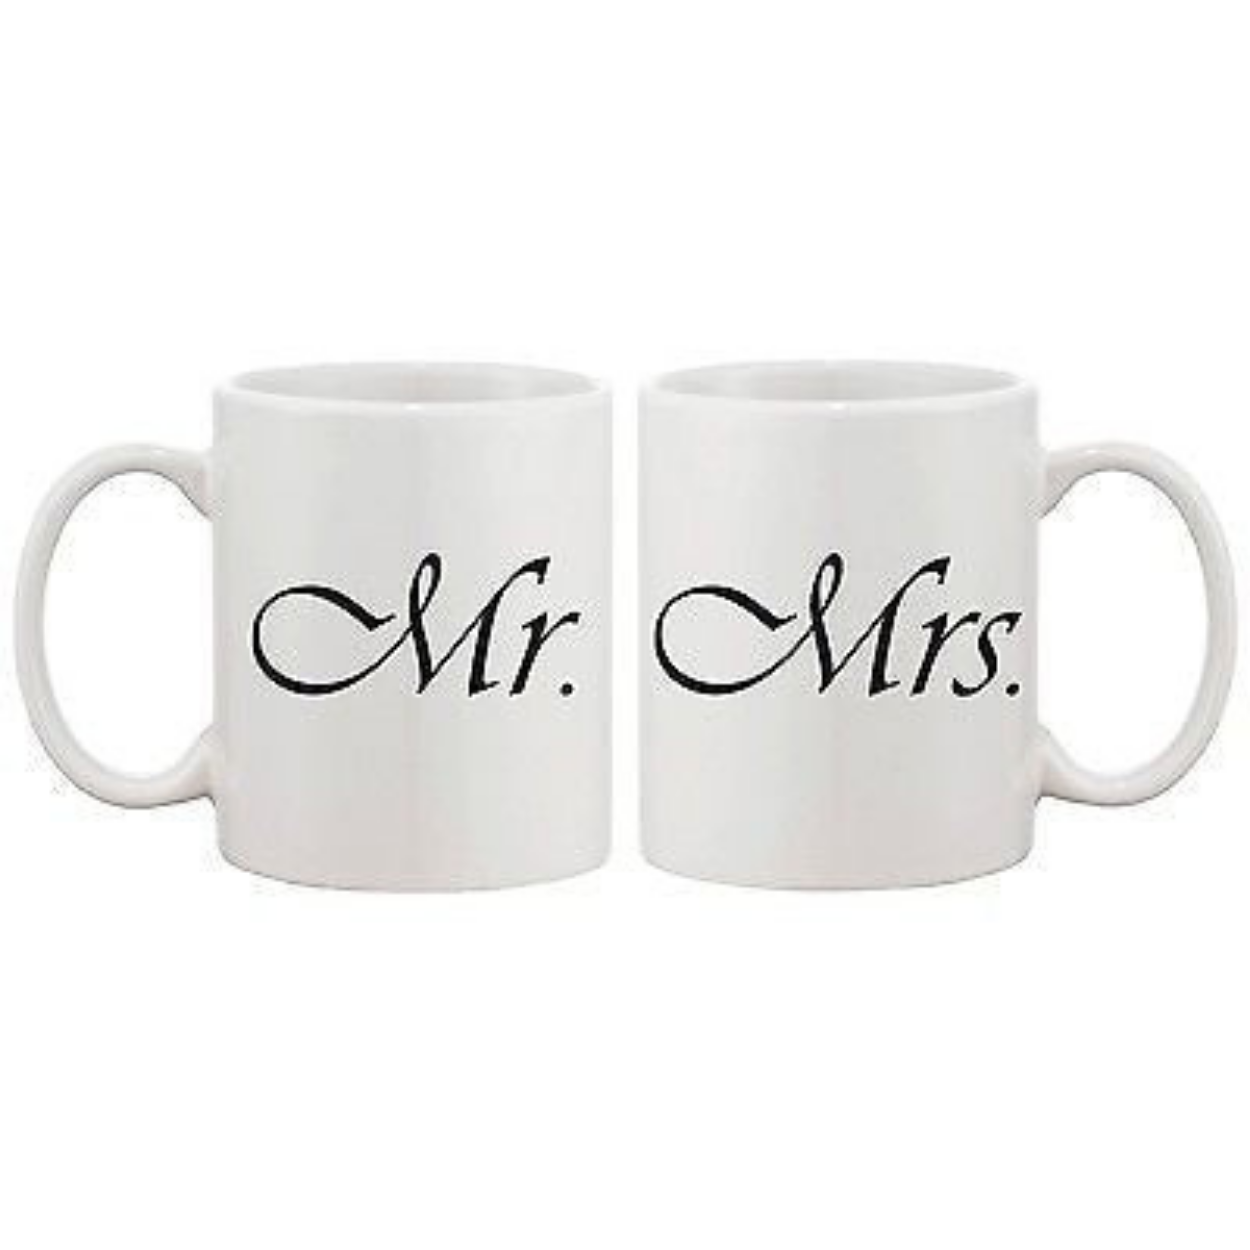 Cute Mr and Mrs Couple Mugs - His and Hers Matching Coffee Mug Cup Set White